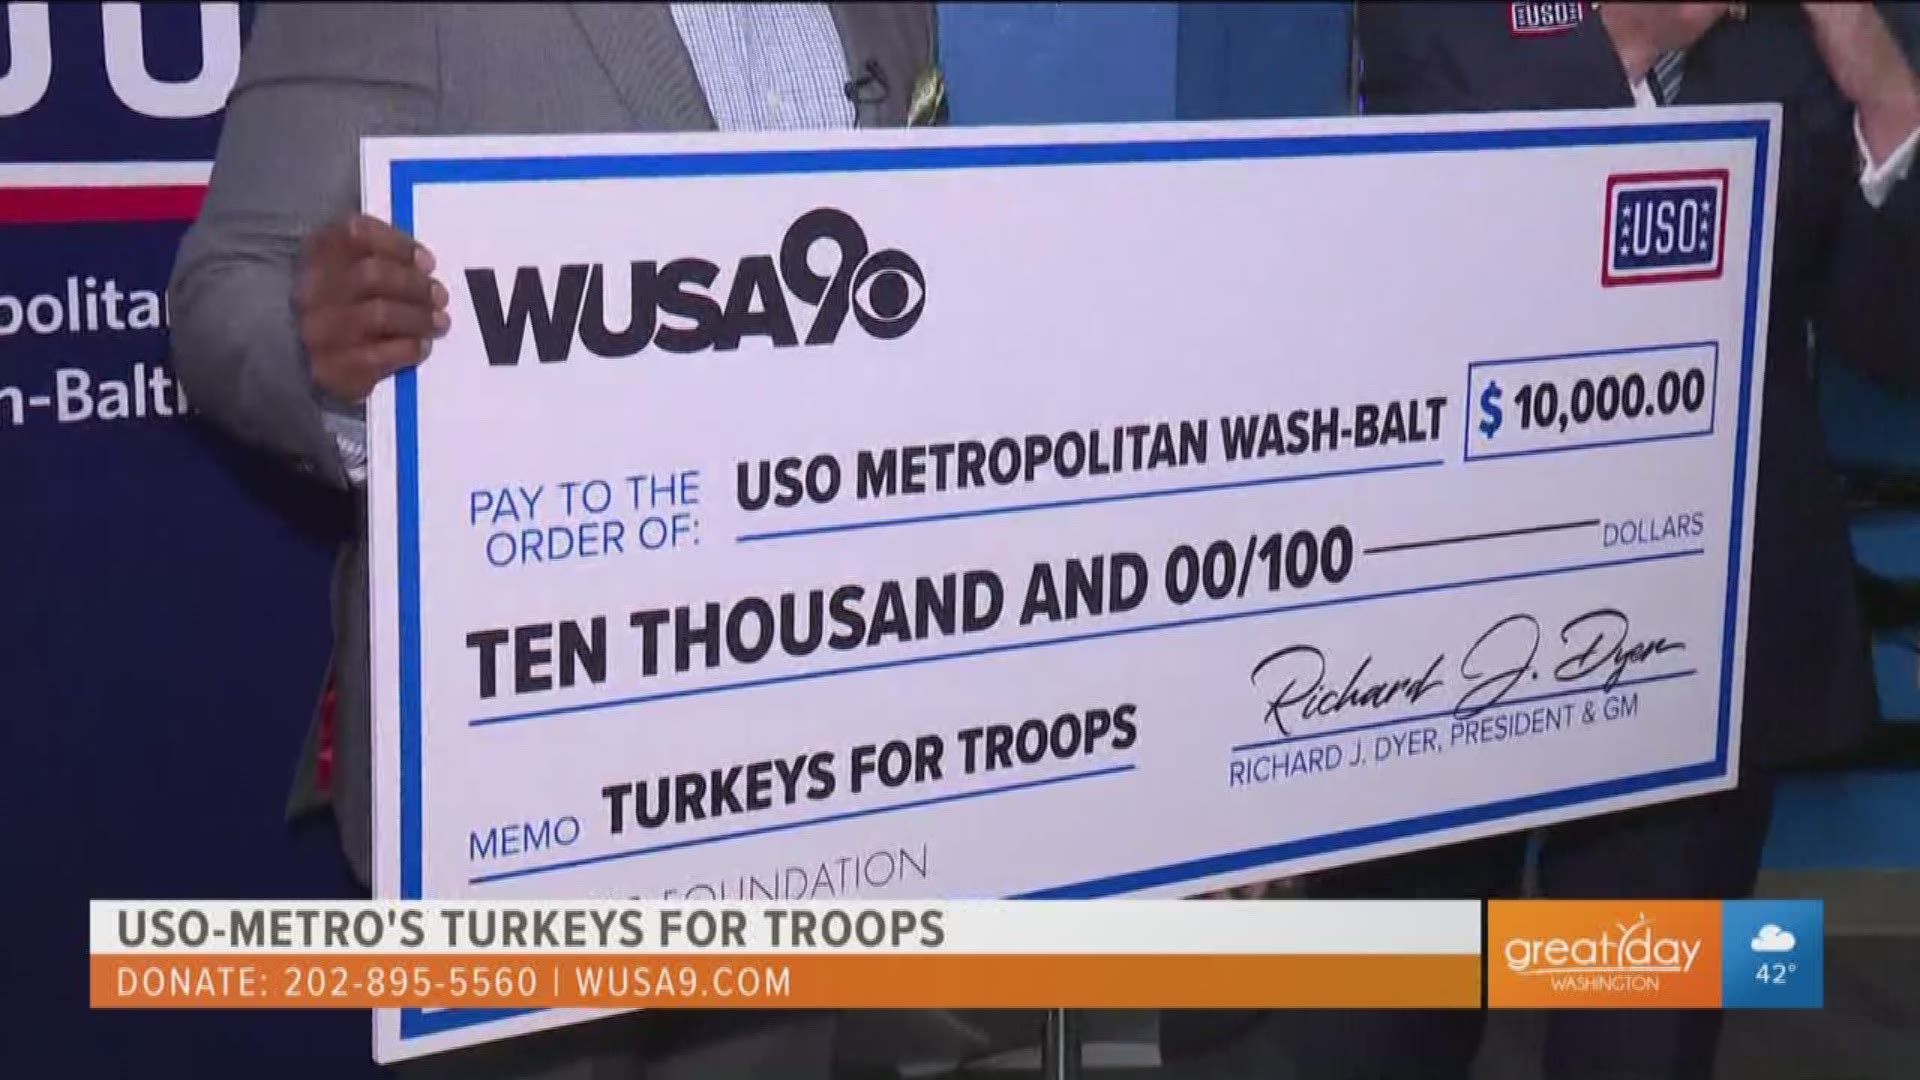 On behalf of WUSA9 and the TEGNA foundation, president and general manager Richard Dyer, donates $10,000 to the USO-Metro's Turkeys for Troops telethon. To find out how you can contribute to their $25,000 goal, call 202-895-5560 or donate online at www.wu